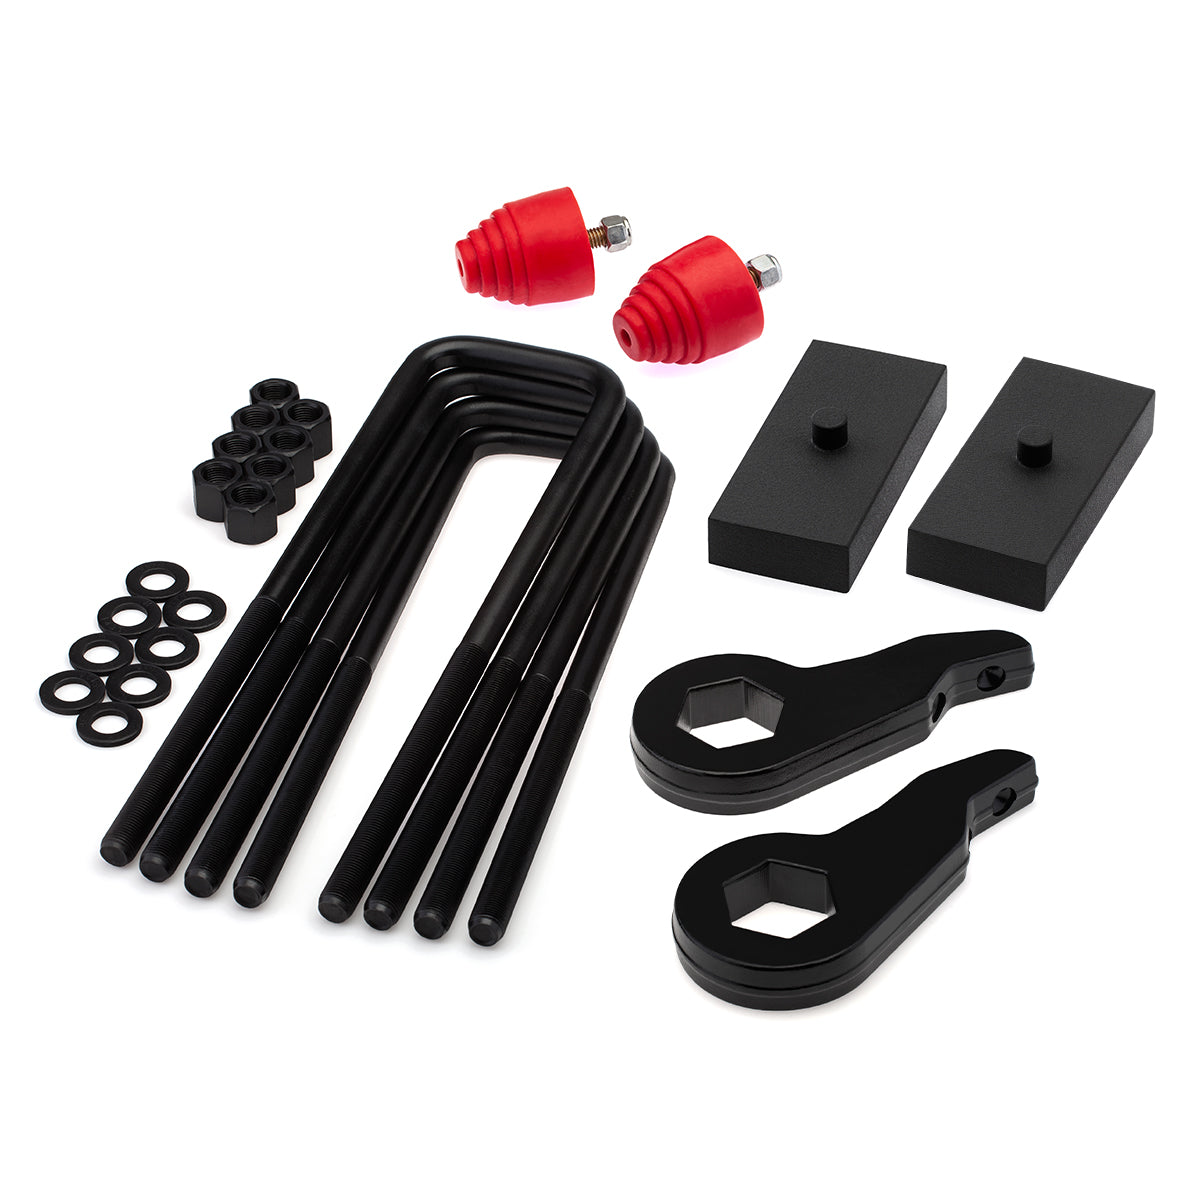 2001-2006 Chevy Avalanche 2500 Full Lift Kit with Bump Stops